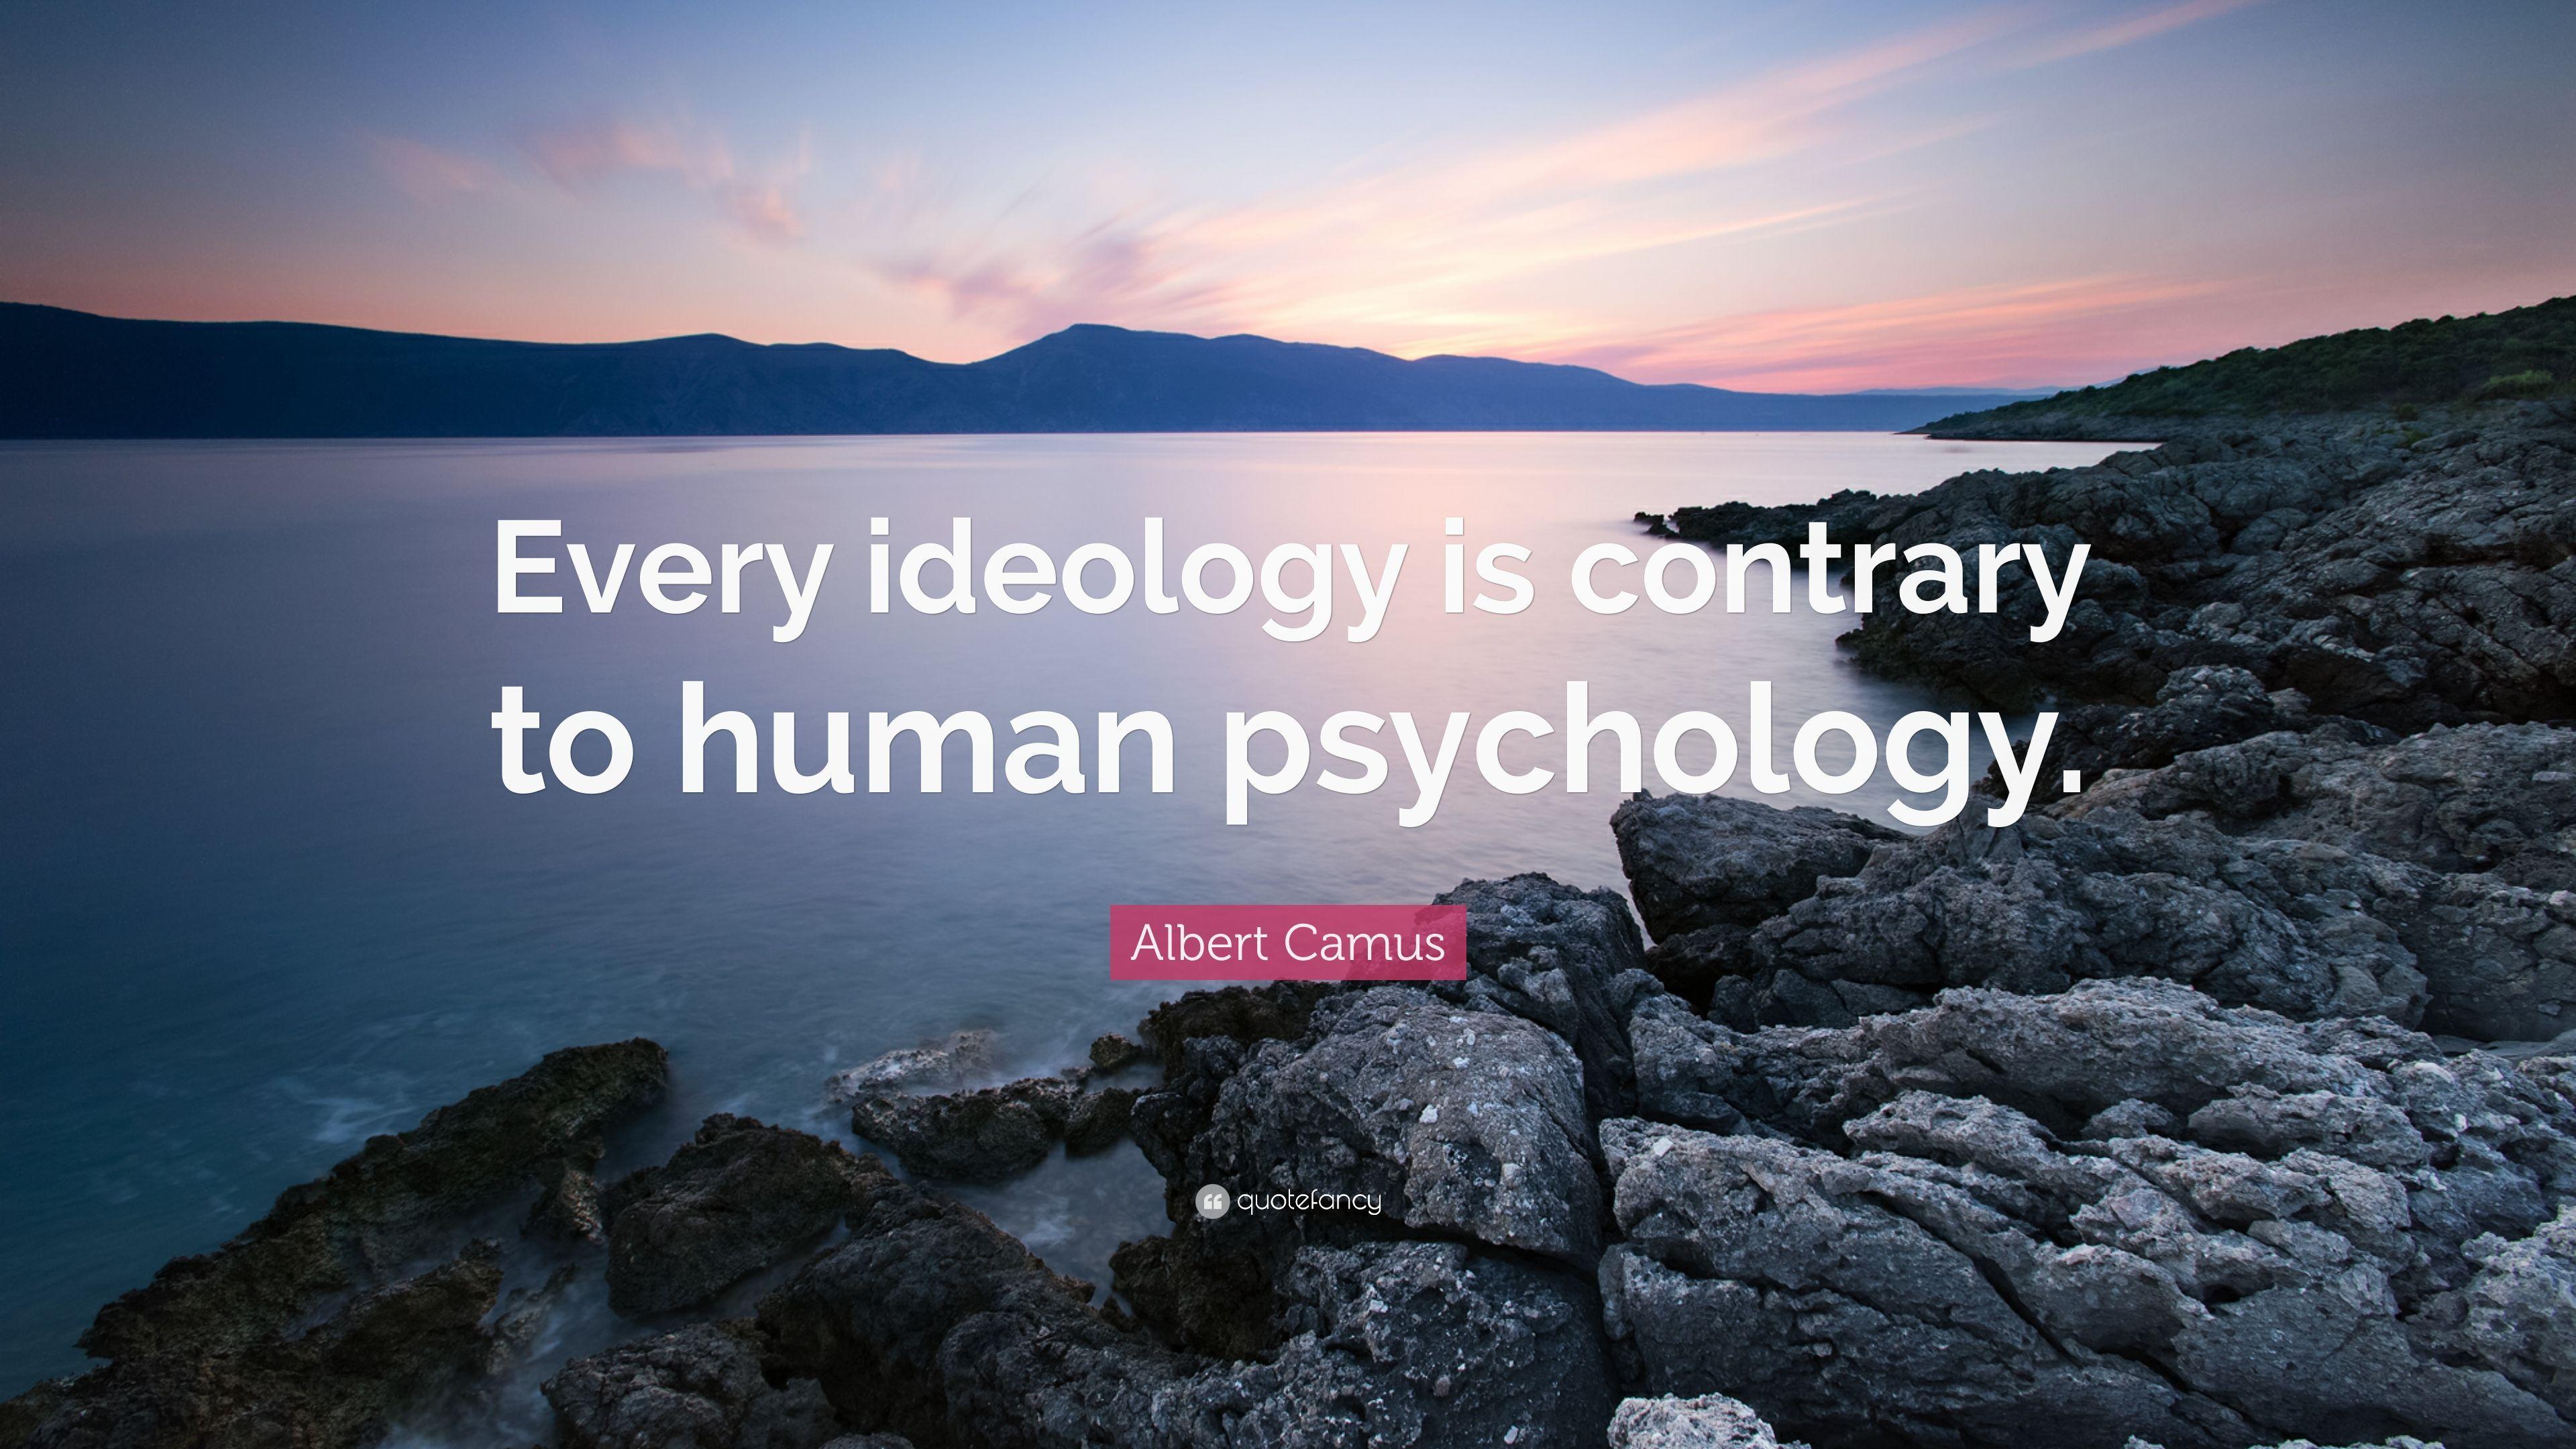 Albert Camus Quote: “Every ideology is contrary to human